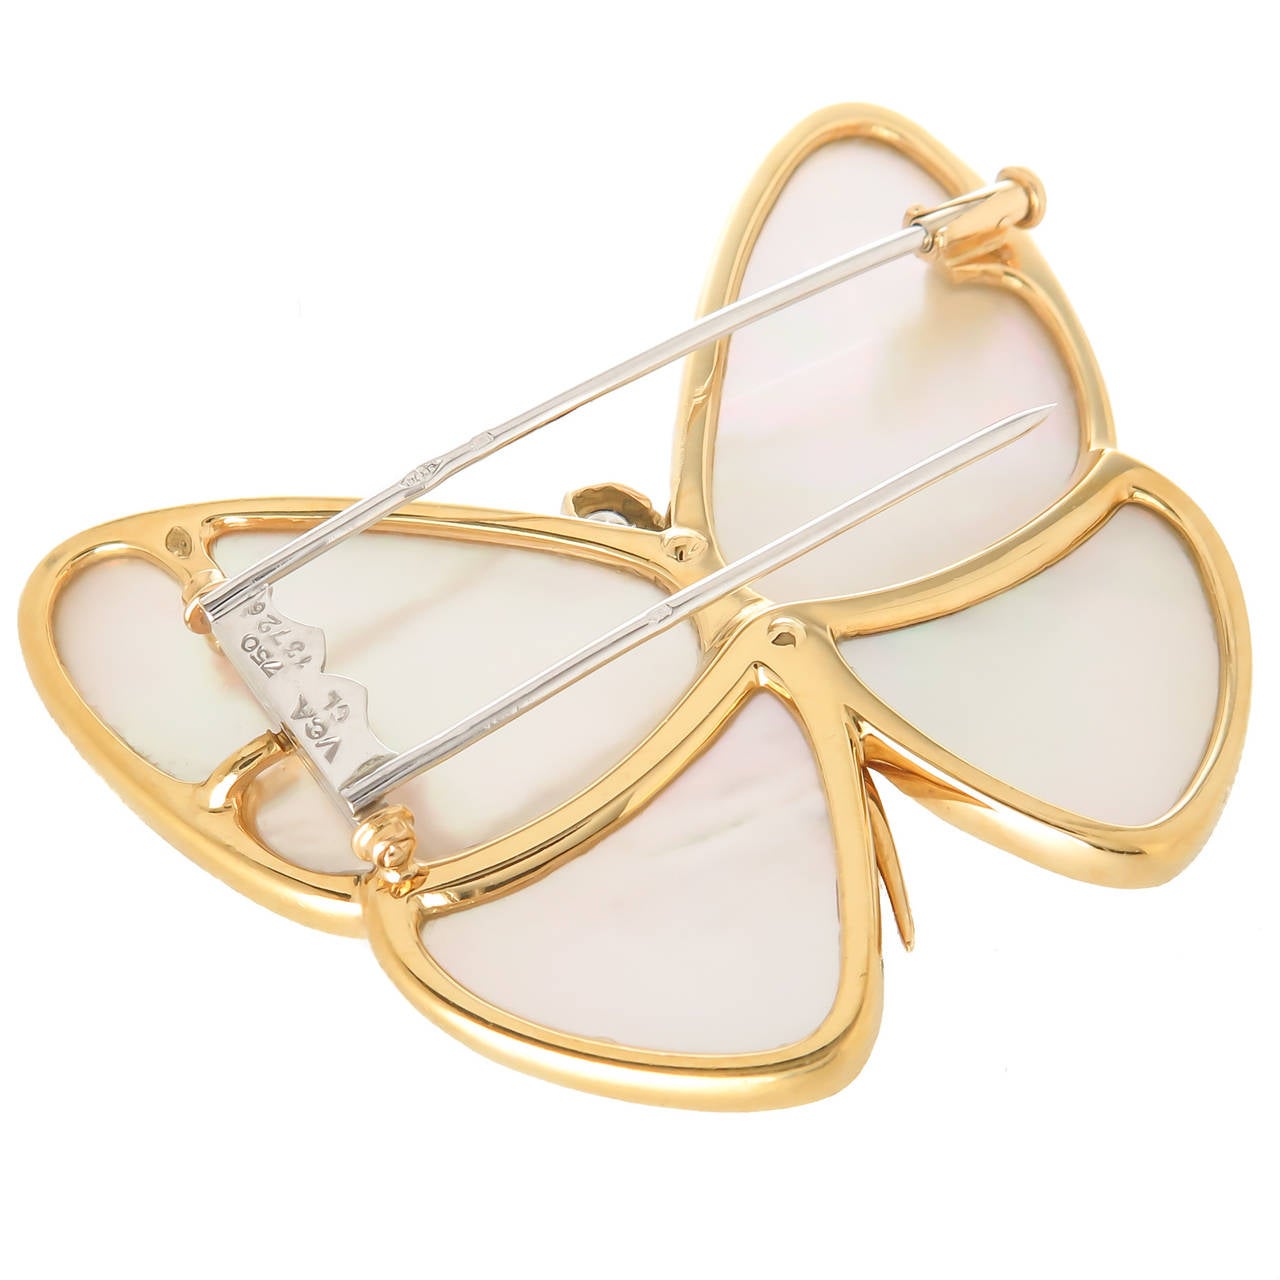 Circa 2010 Van Cleef & Arpels Butterfly Brooch, 18K yellow gold and White Mother of pearl, set with 9 graduating round Brilliant cut Diamonds totaling .40 carat. Measuring 1 7/8  inch  x  1 5/8 inch. Double Clip back, signed, numbered and having